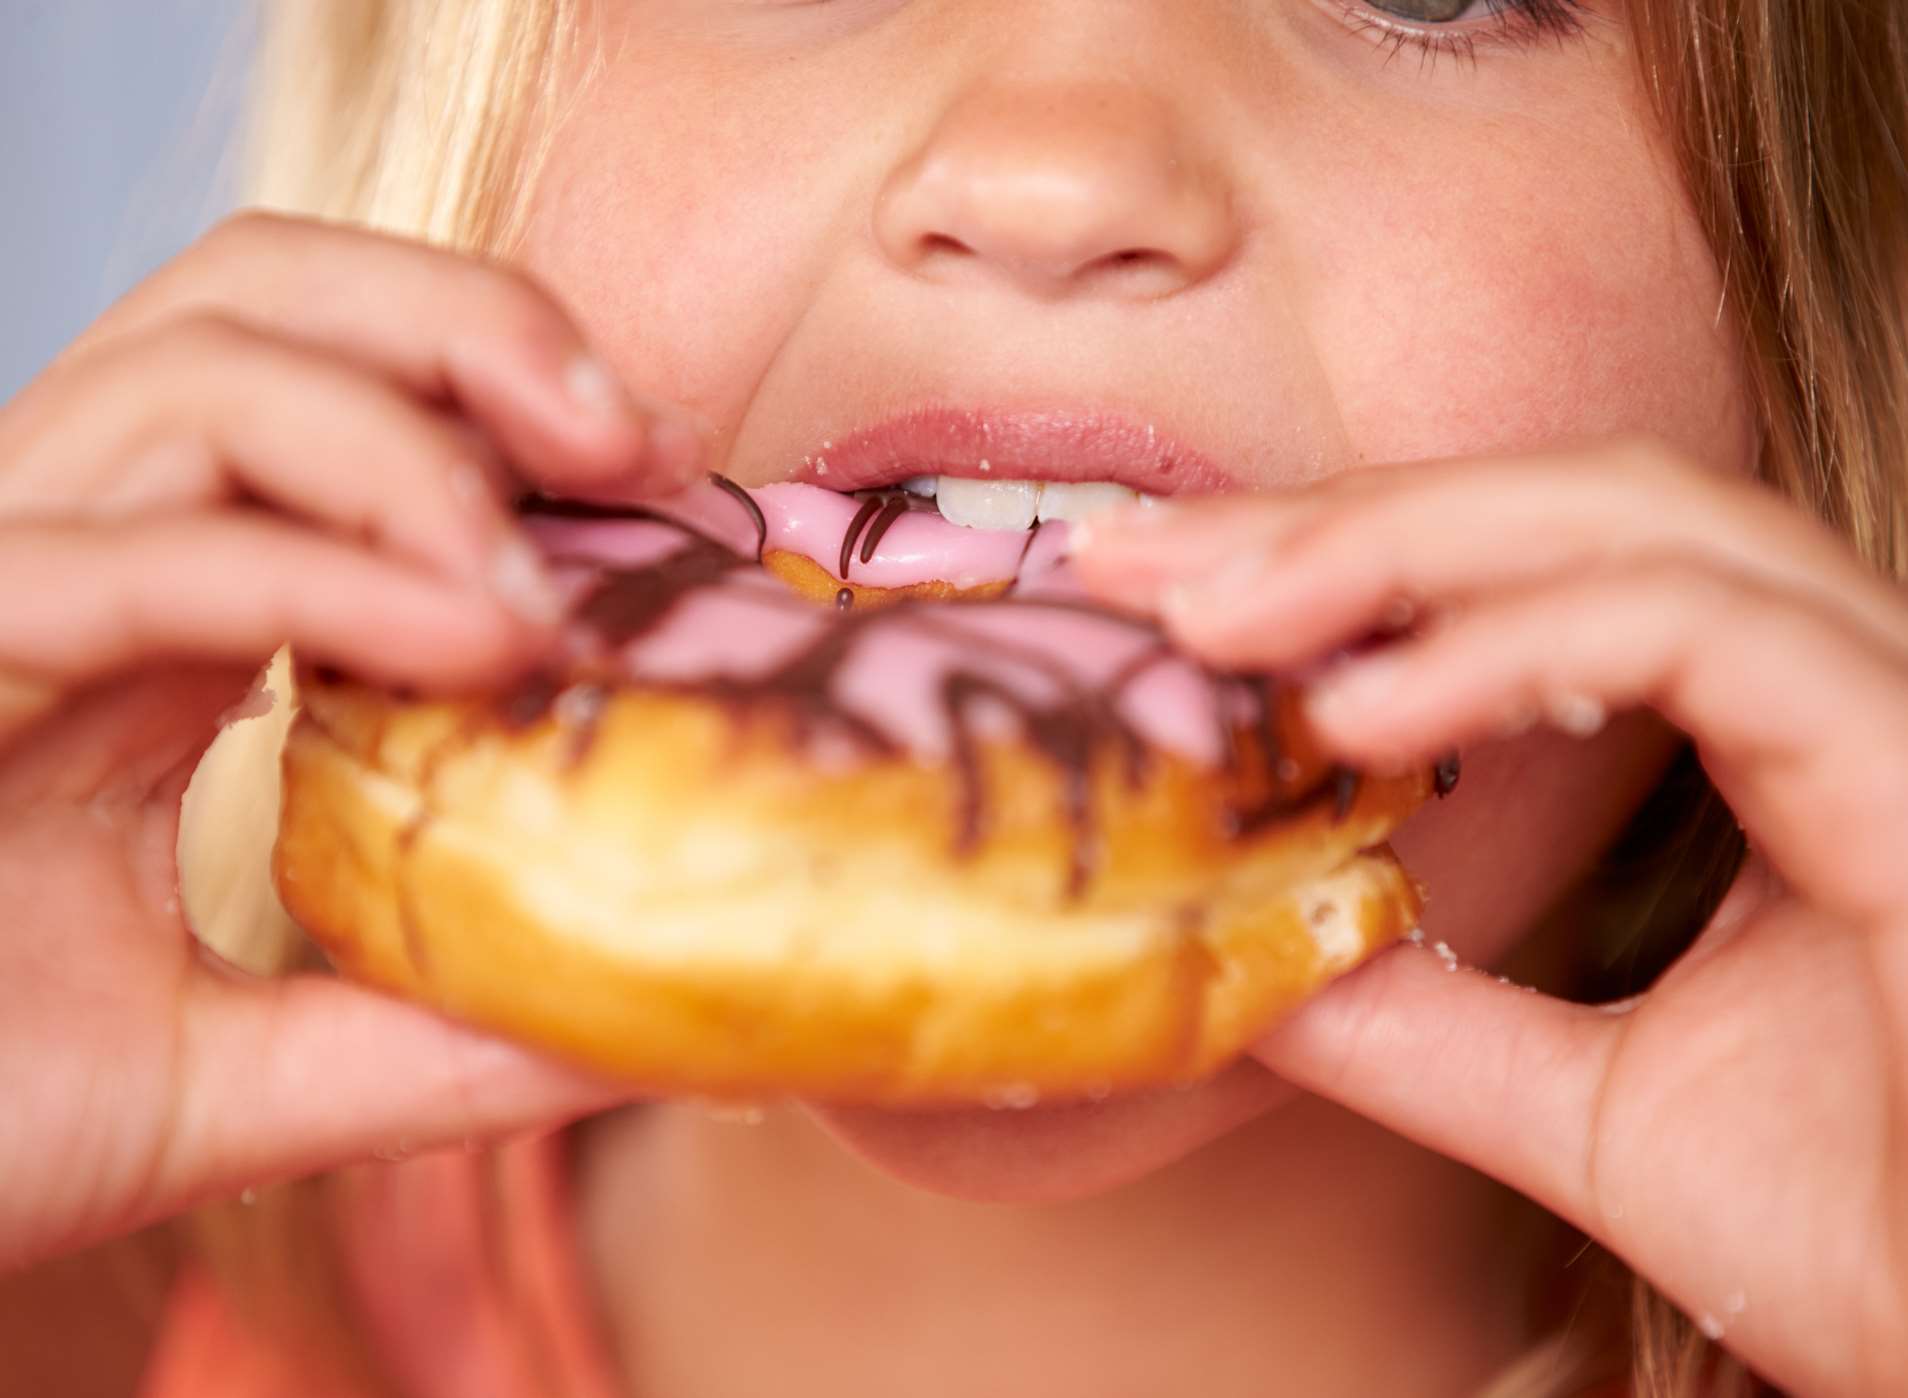 Families are being urged to ditch the doughnuts in favour of two healthy snacks a day.